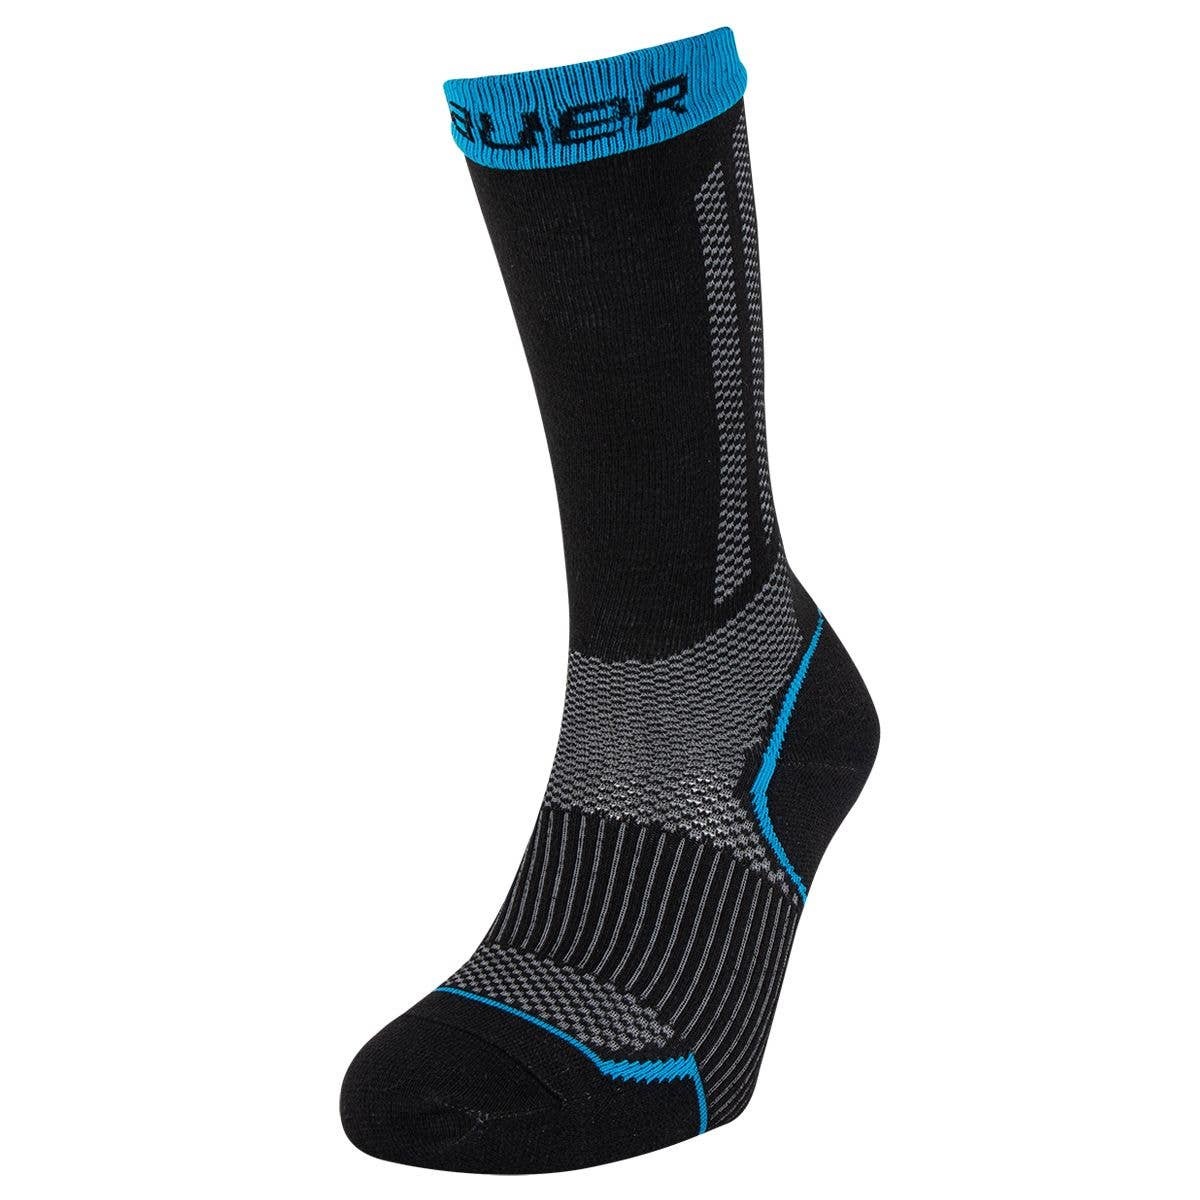 BAUER S21 PERFORMANCE TALL SKATE SOCK - Sportwheels Sports Excellence